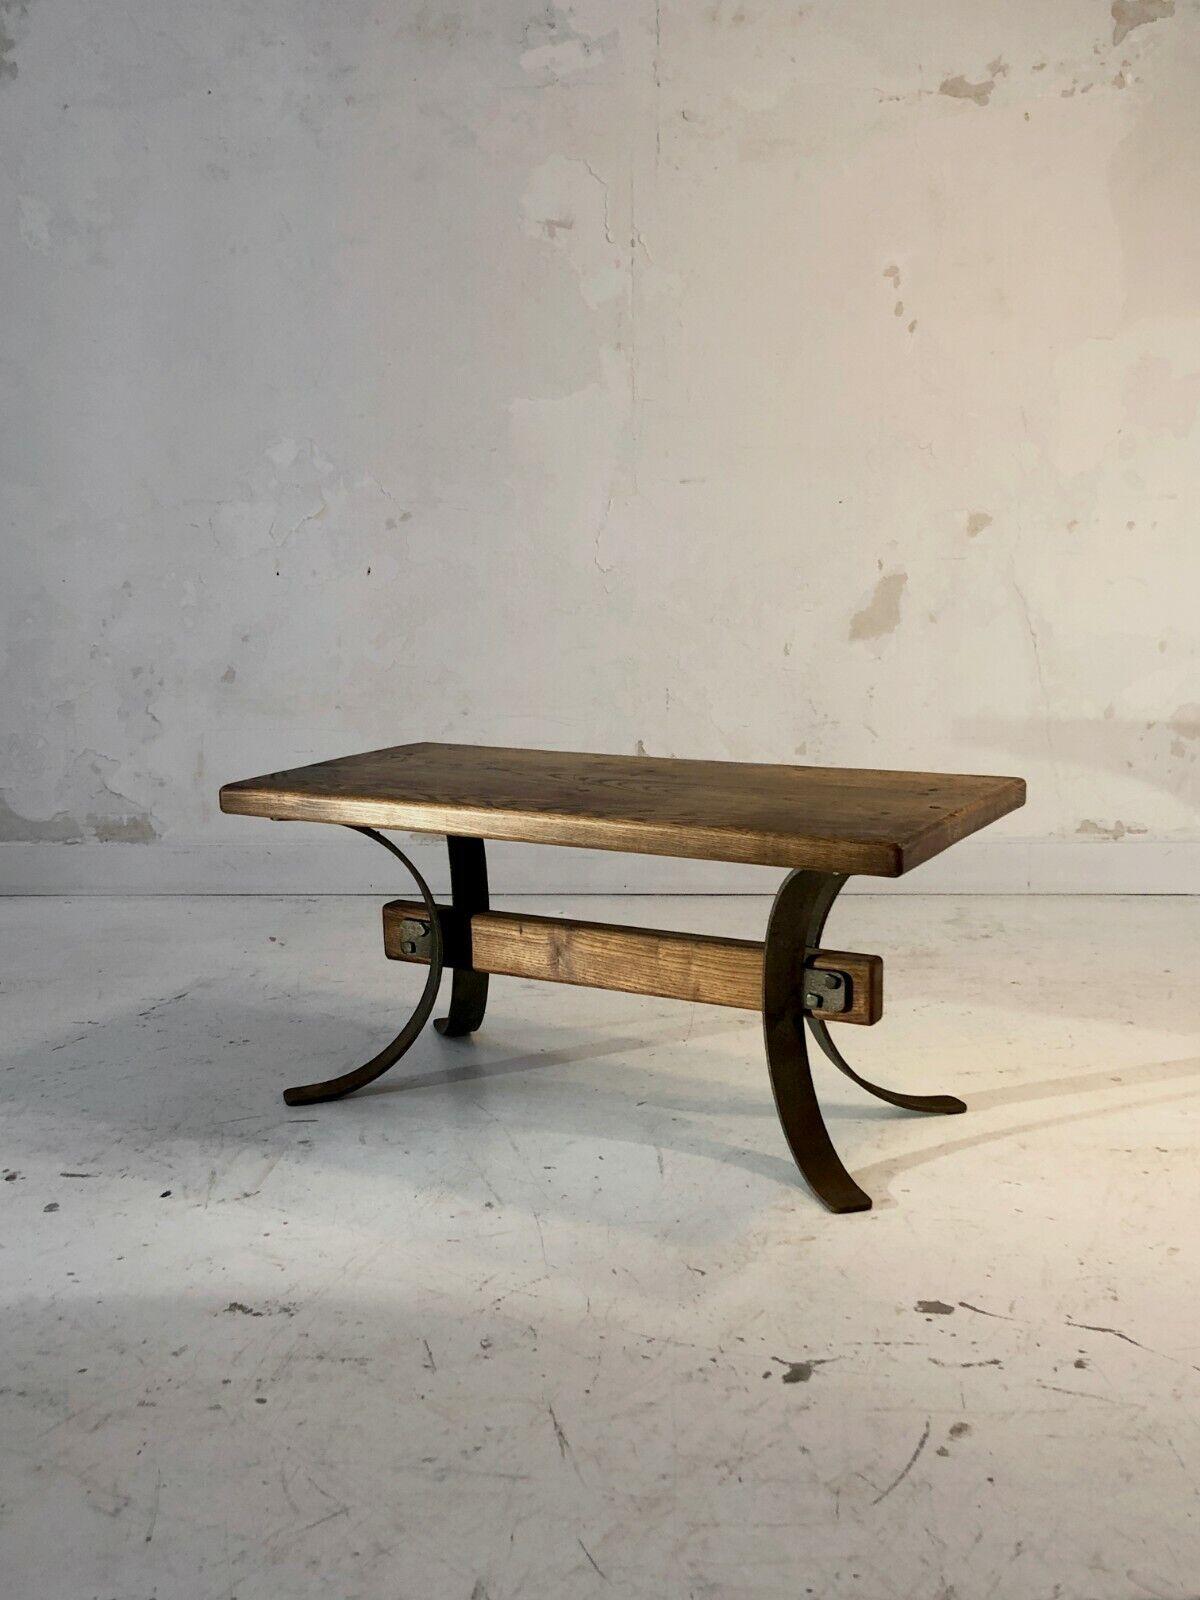 An astonishing coffee table both raw and sophisticated, massive and airy, Modernist, Brutalist, Popular Art, Free Form, powerful ironwork structure offset by legs with curved lines with a seventies look, and oak crossbar and top massive, to be